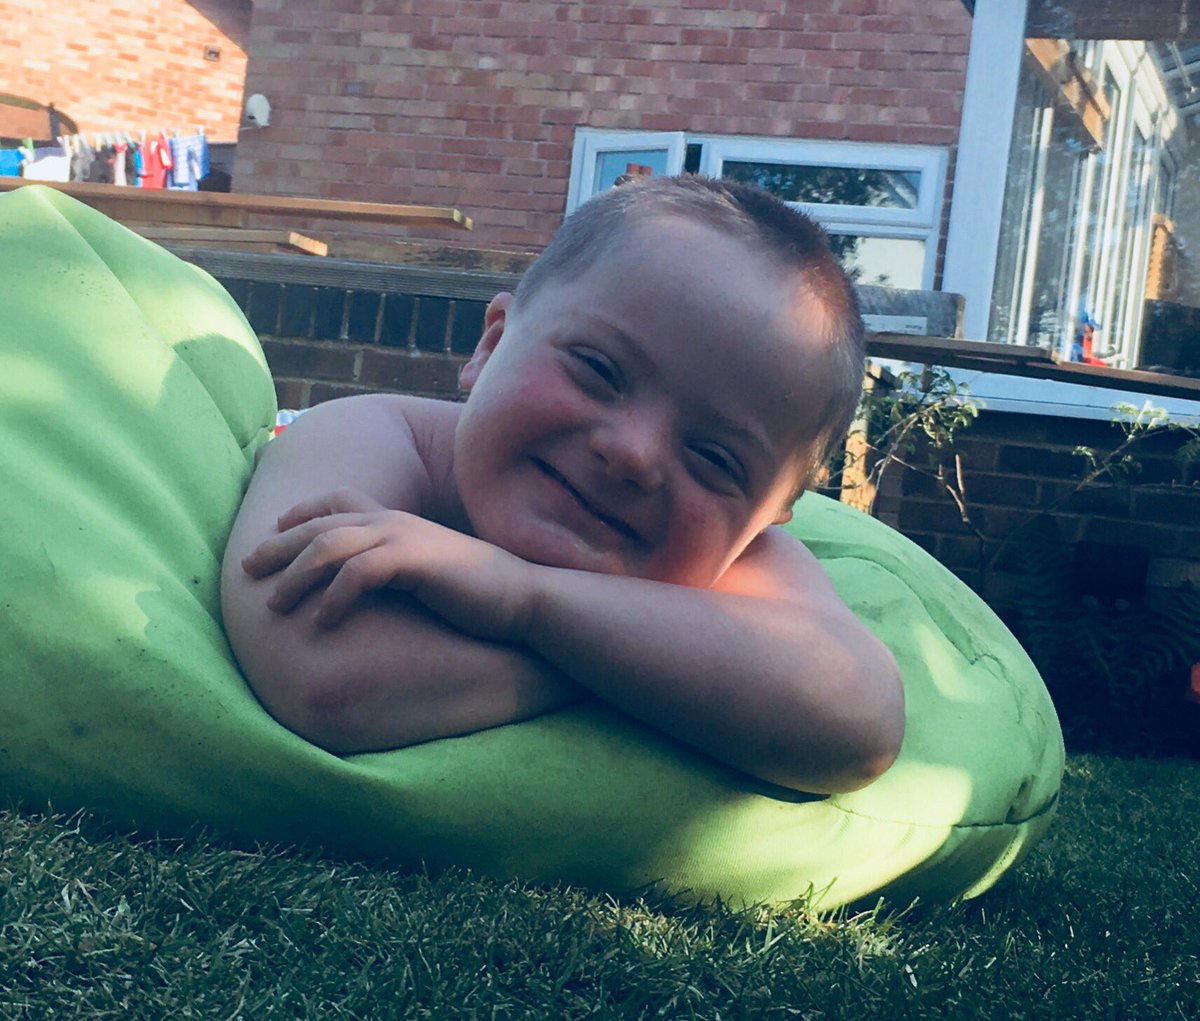 My beautiful boy! Full of fun, full of cheek! He’s the best company and a fab brother to his sis and bro! And he’s ours ❤️ #sunnyfamilydays #wouldntchangeathing #luckyfew #equallyvalued #positiveaboutdownssyndrome